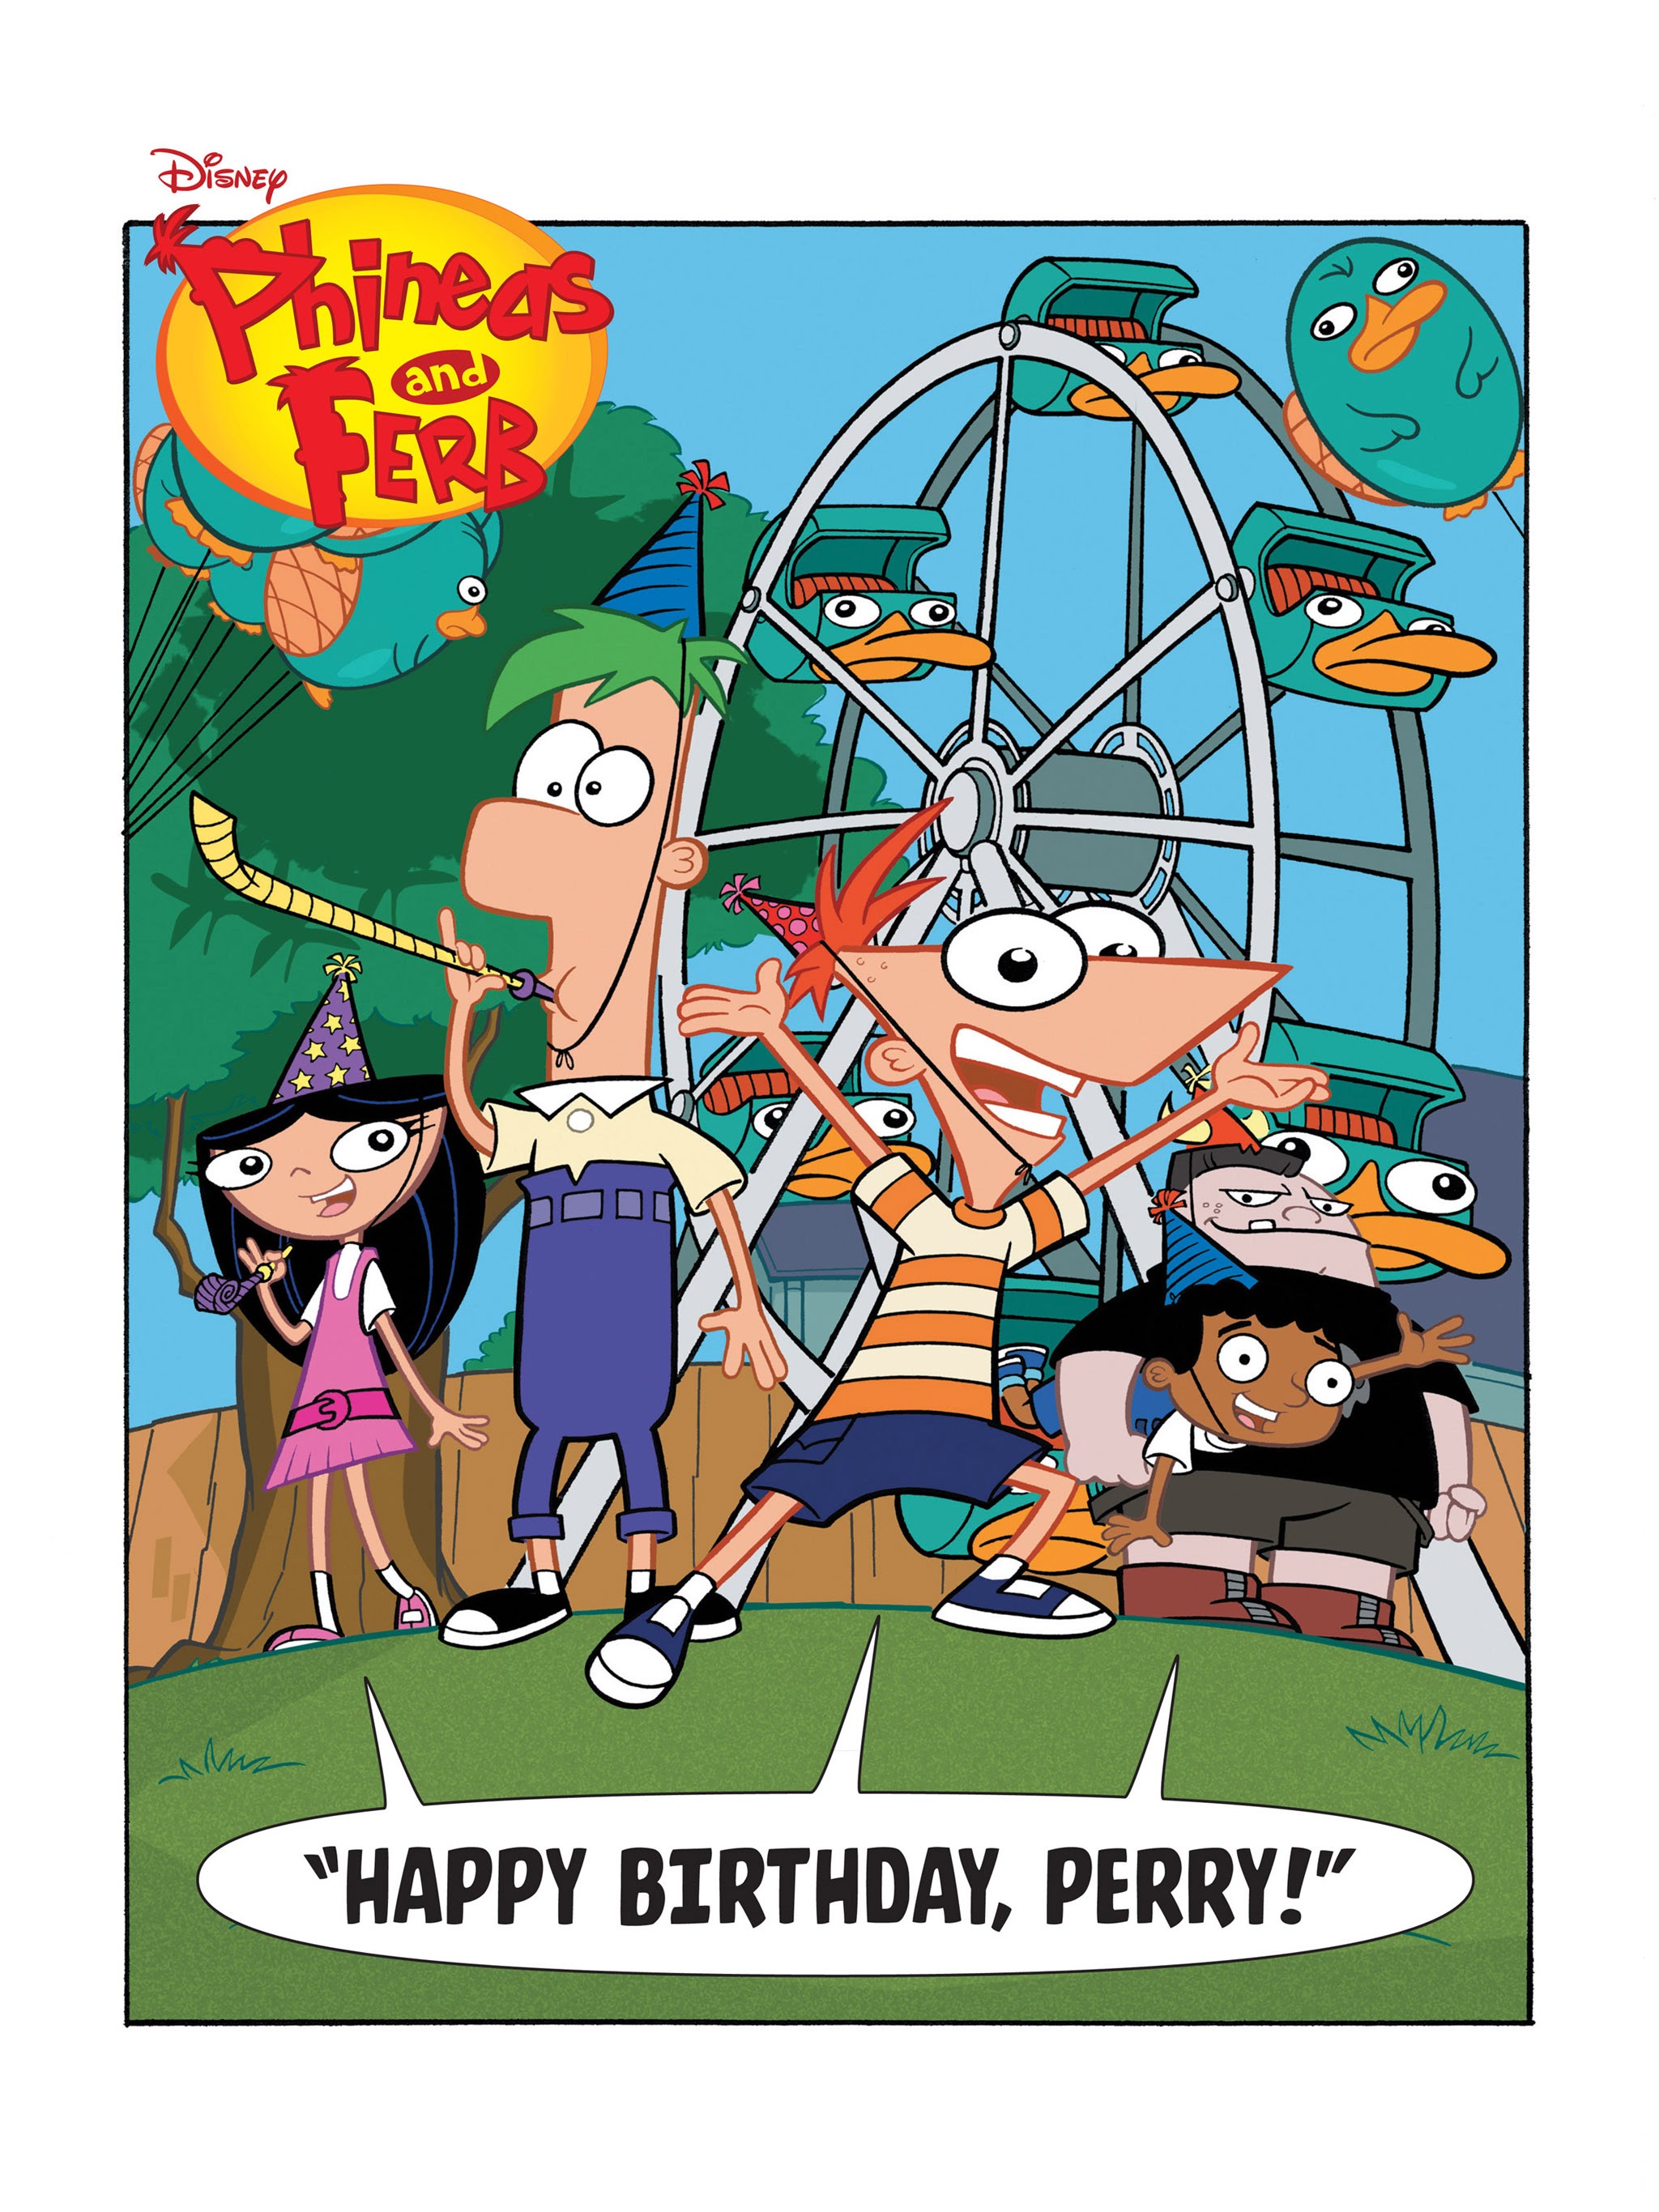 Read online Phineas and Ferb comic -  Issue # Full - 2